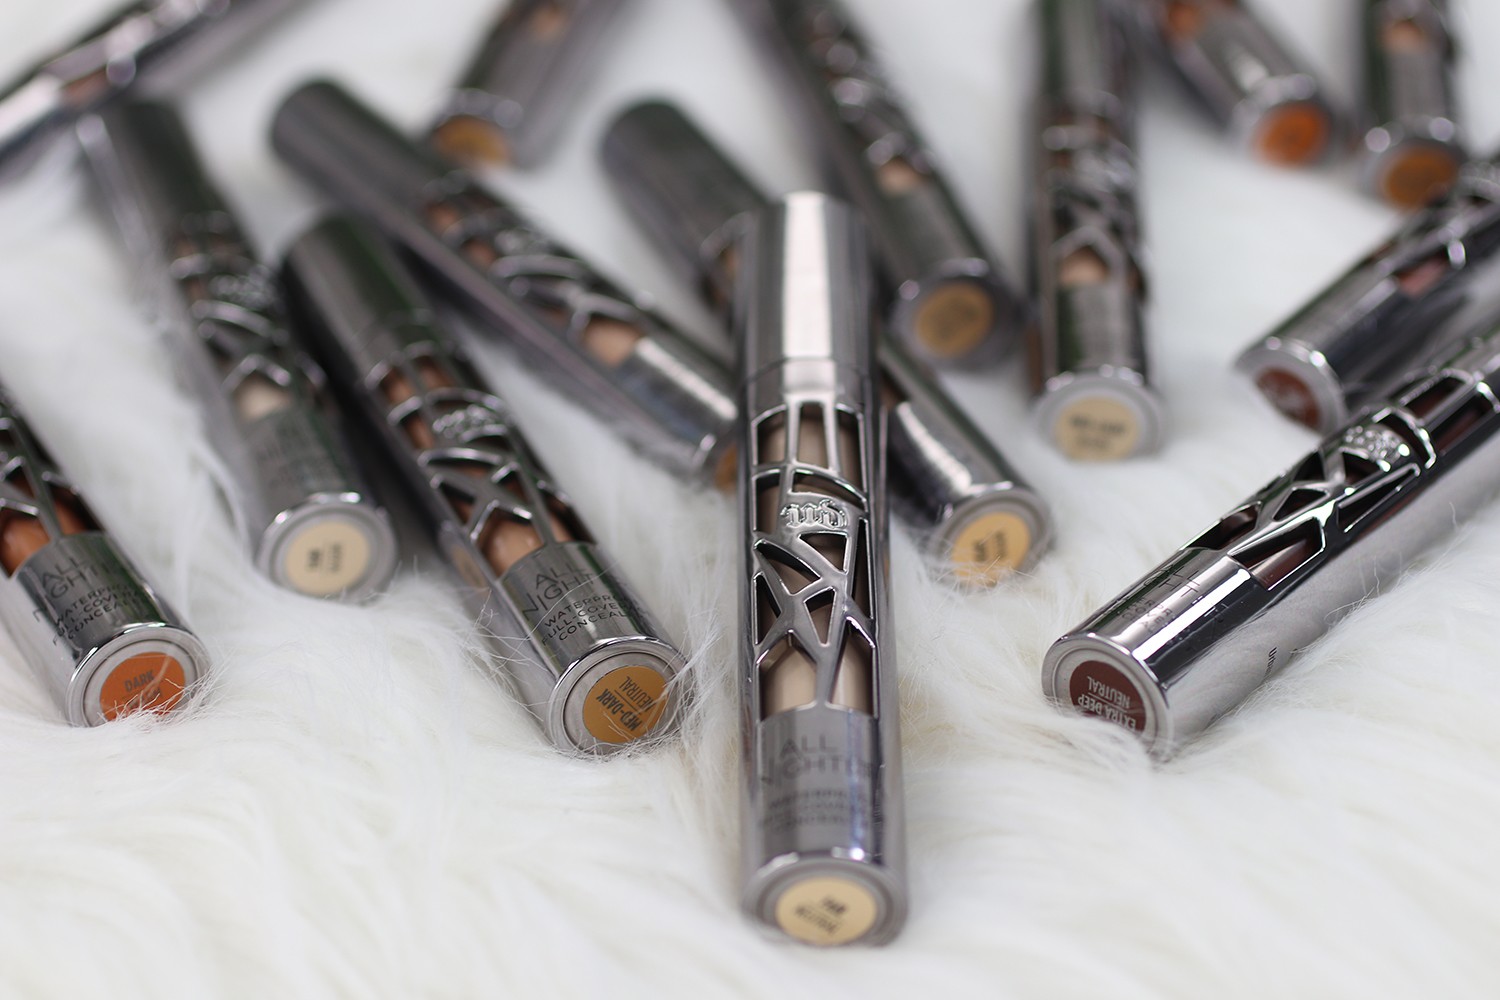 Urban Decay All Nighter Concealer Review